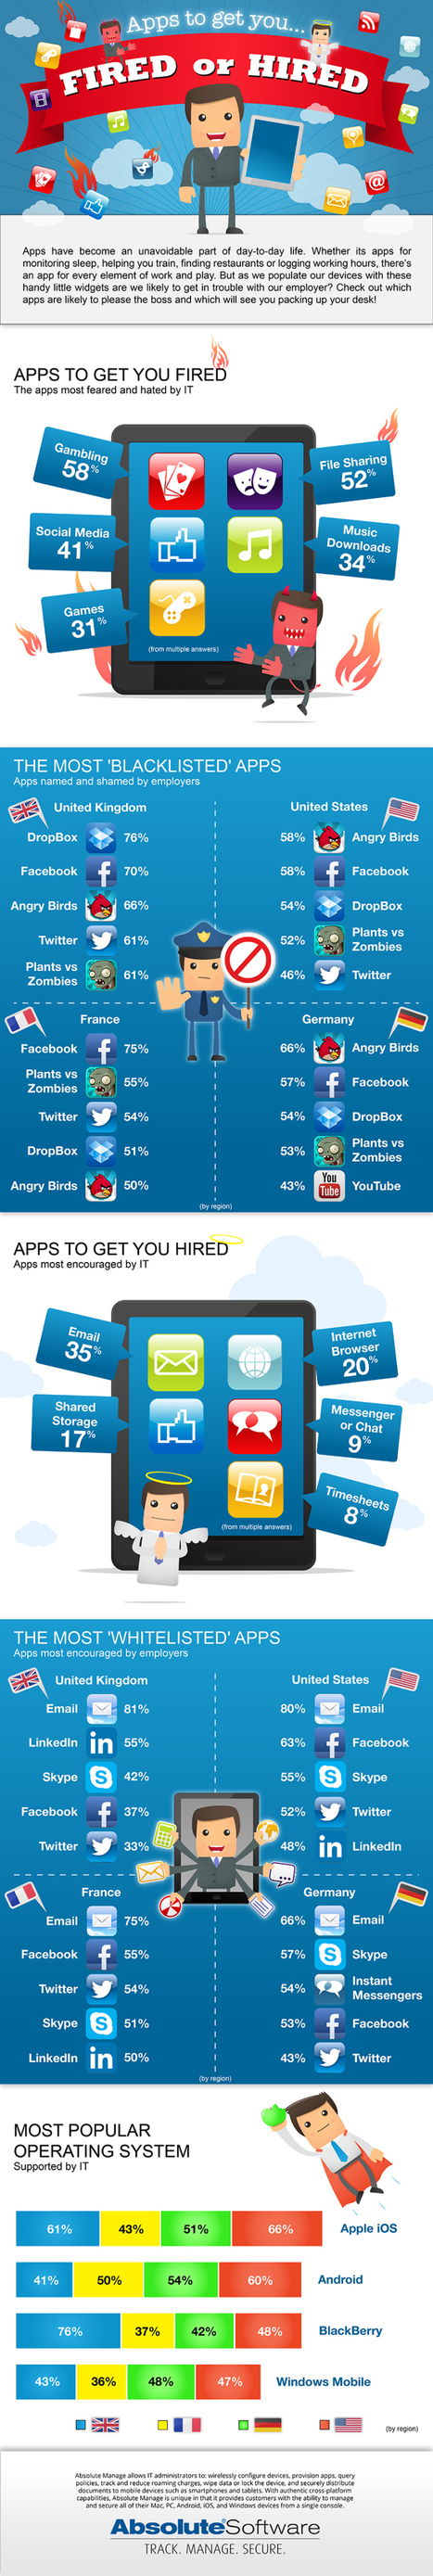 Apps to get you ... Fired or Hired | Mobile Technology | Scoop.it